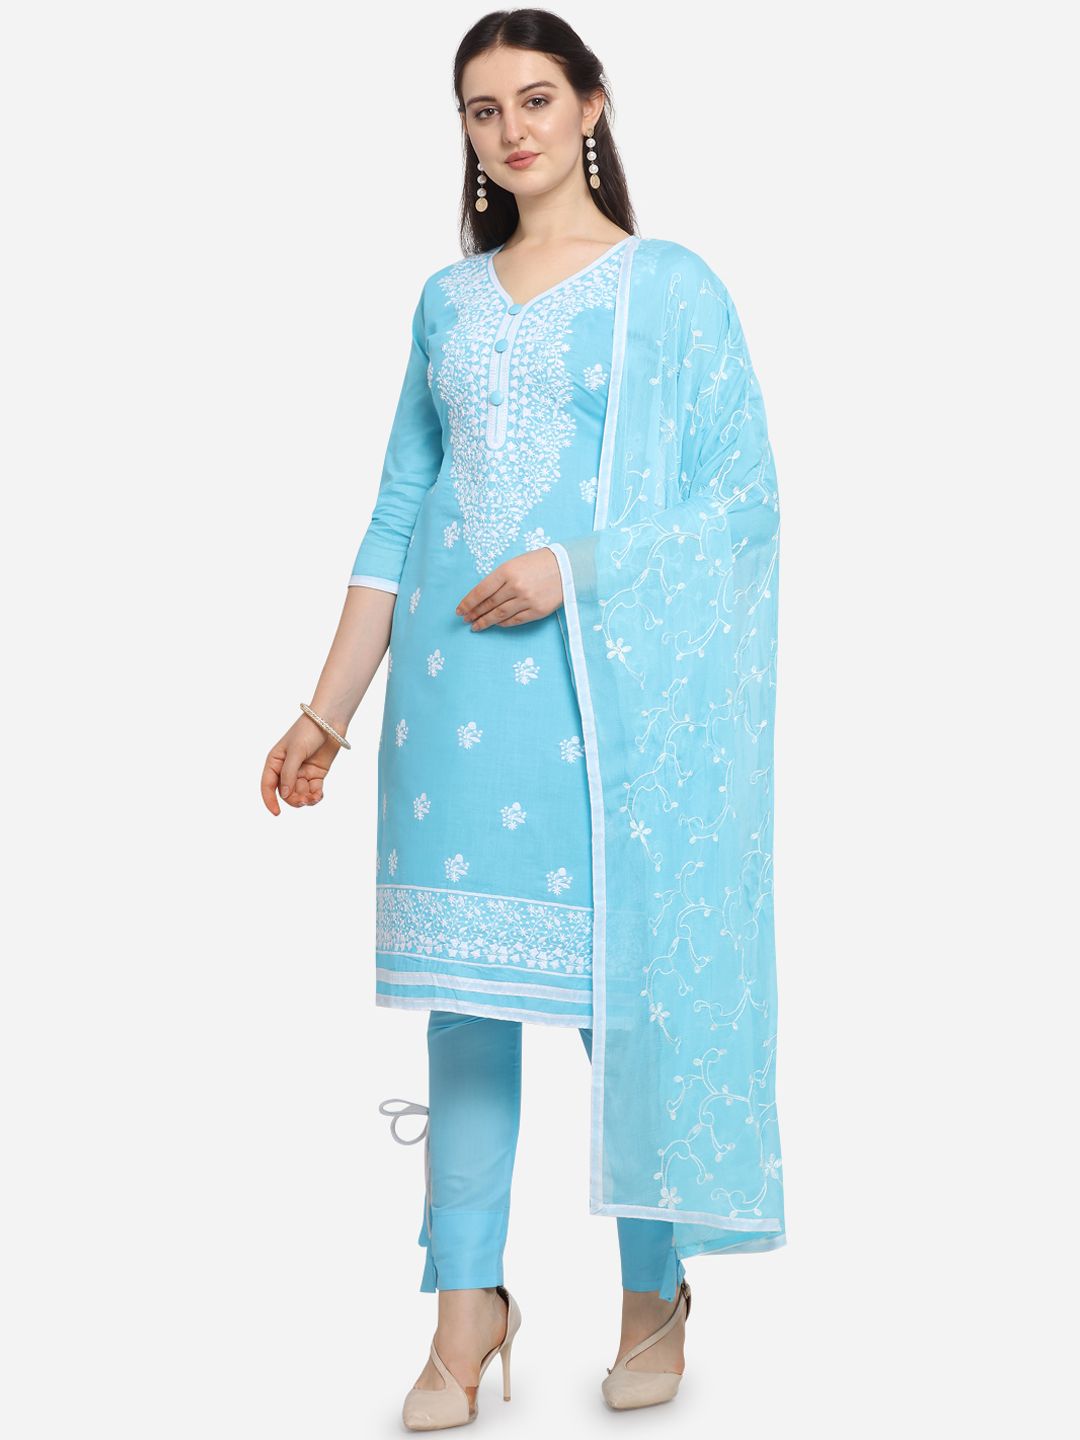 Ethnic Junction Blue & White Cotton Blend Unstitched Dress Material Price in India